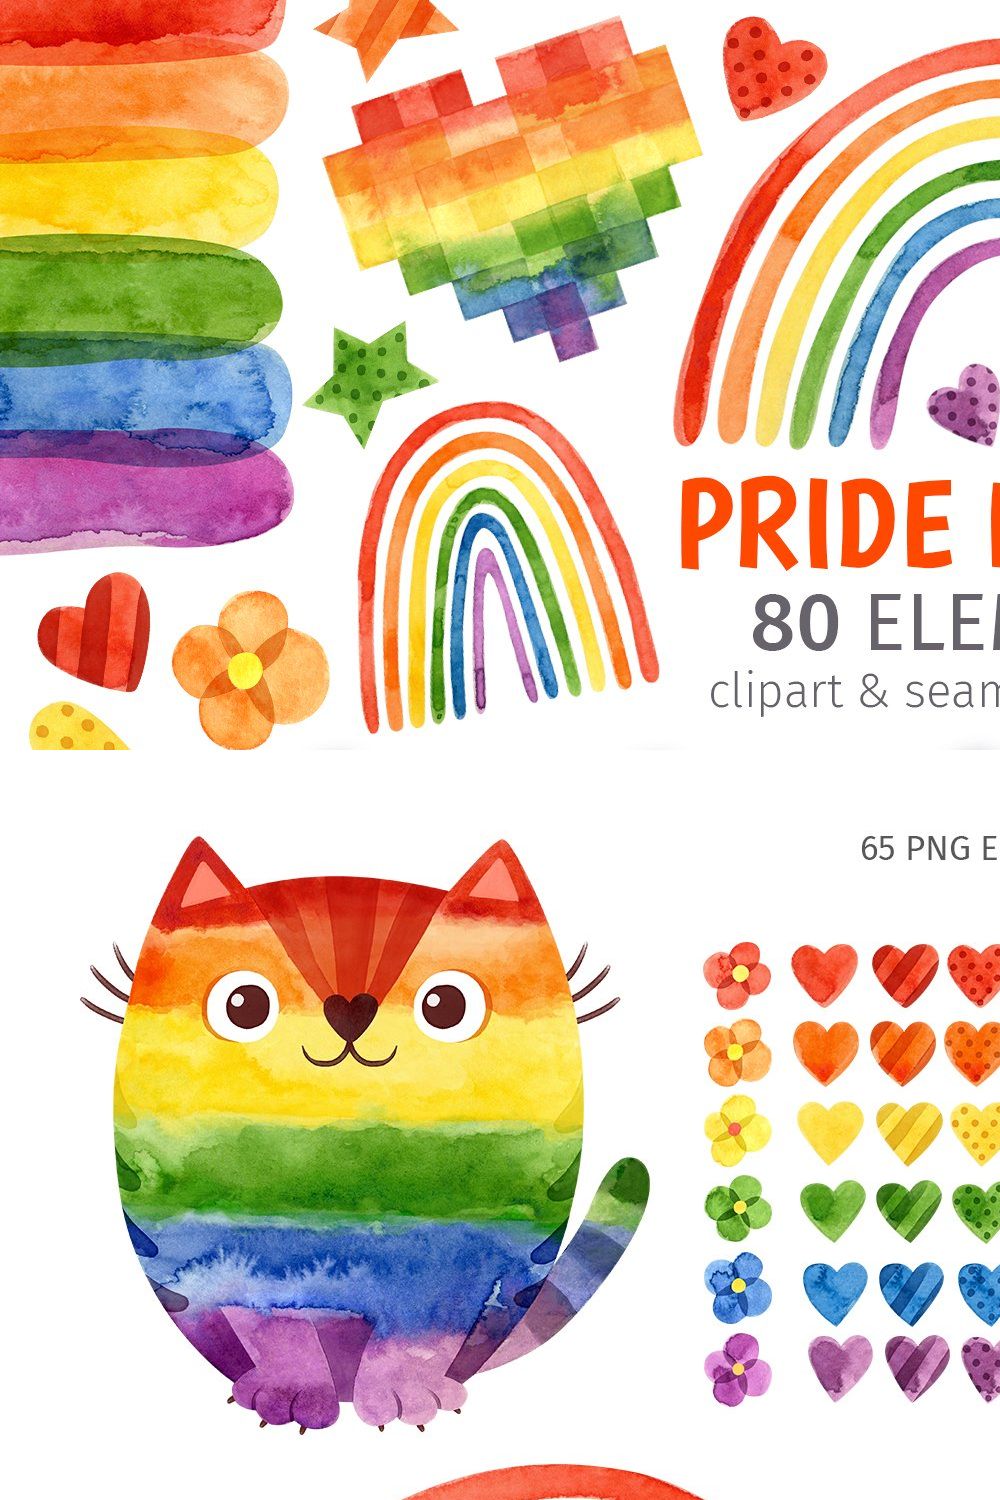 LGBT pride month clipart & patterns pinterest preview image.